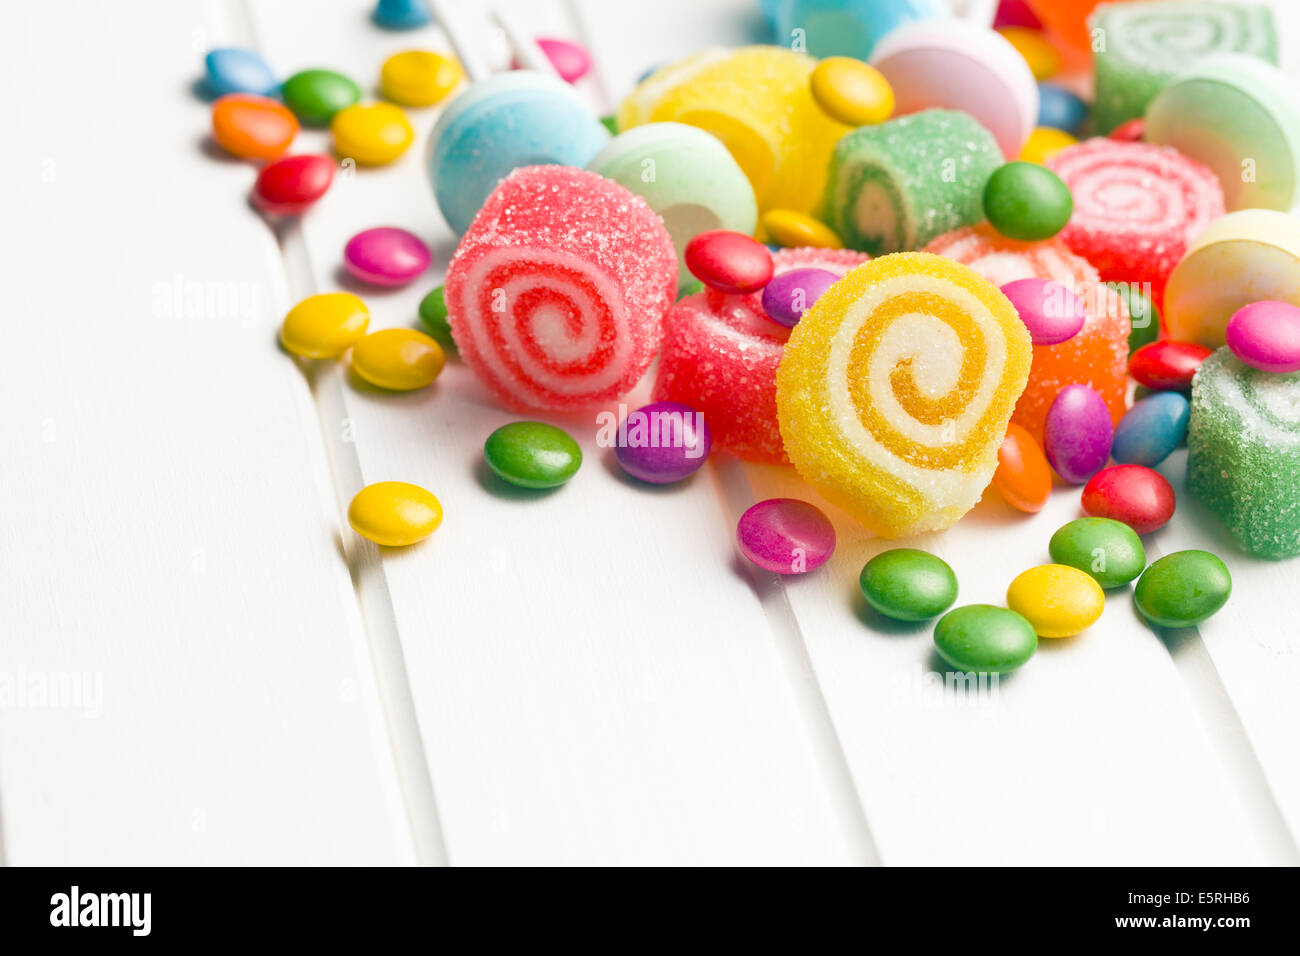 colorful candy on white table Stock Photo